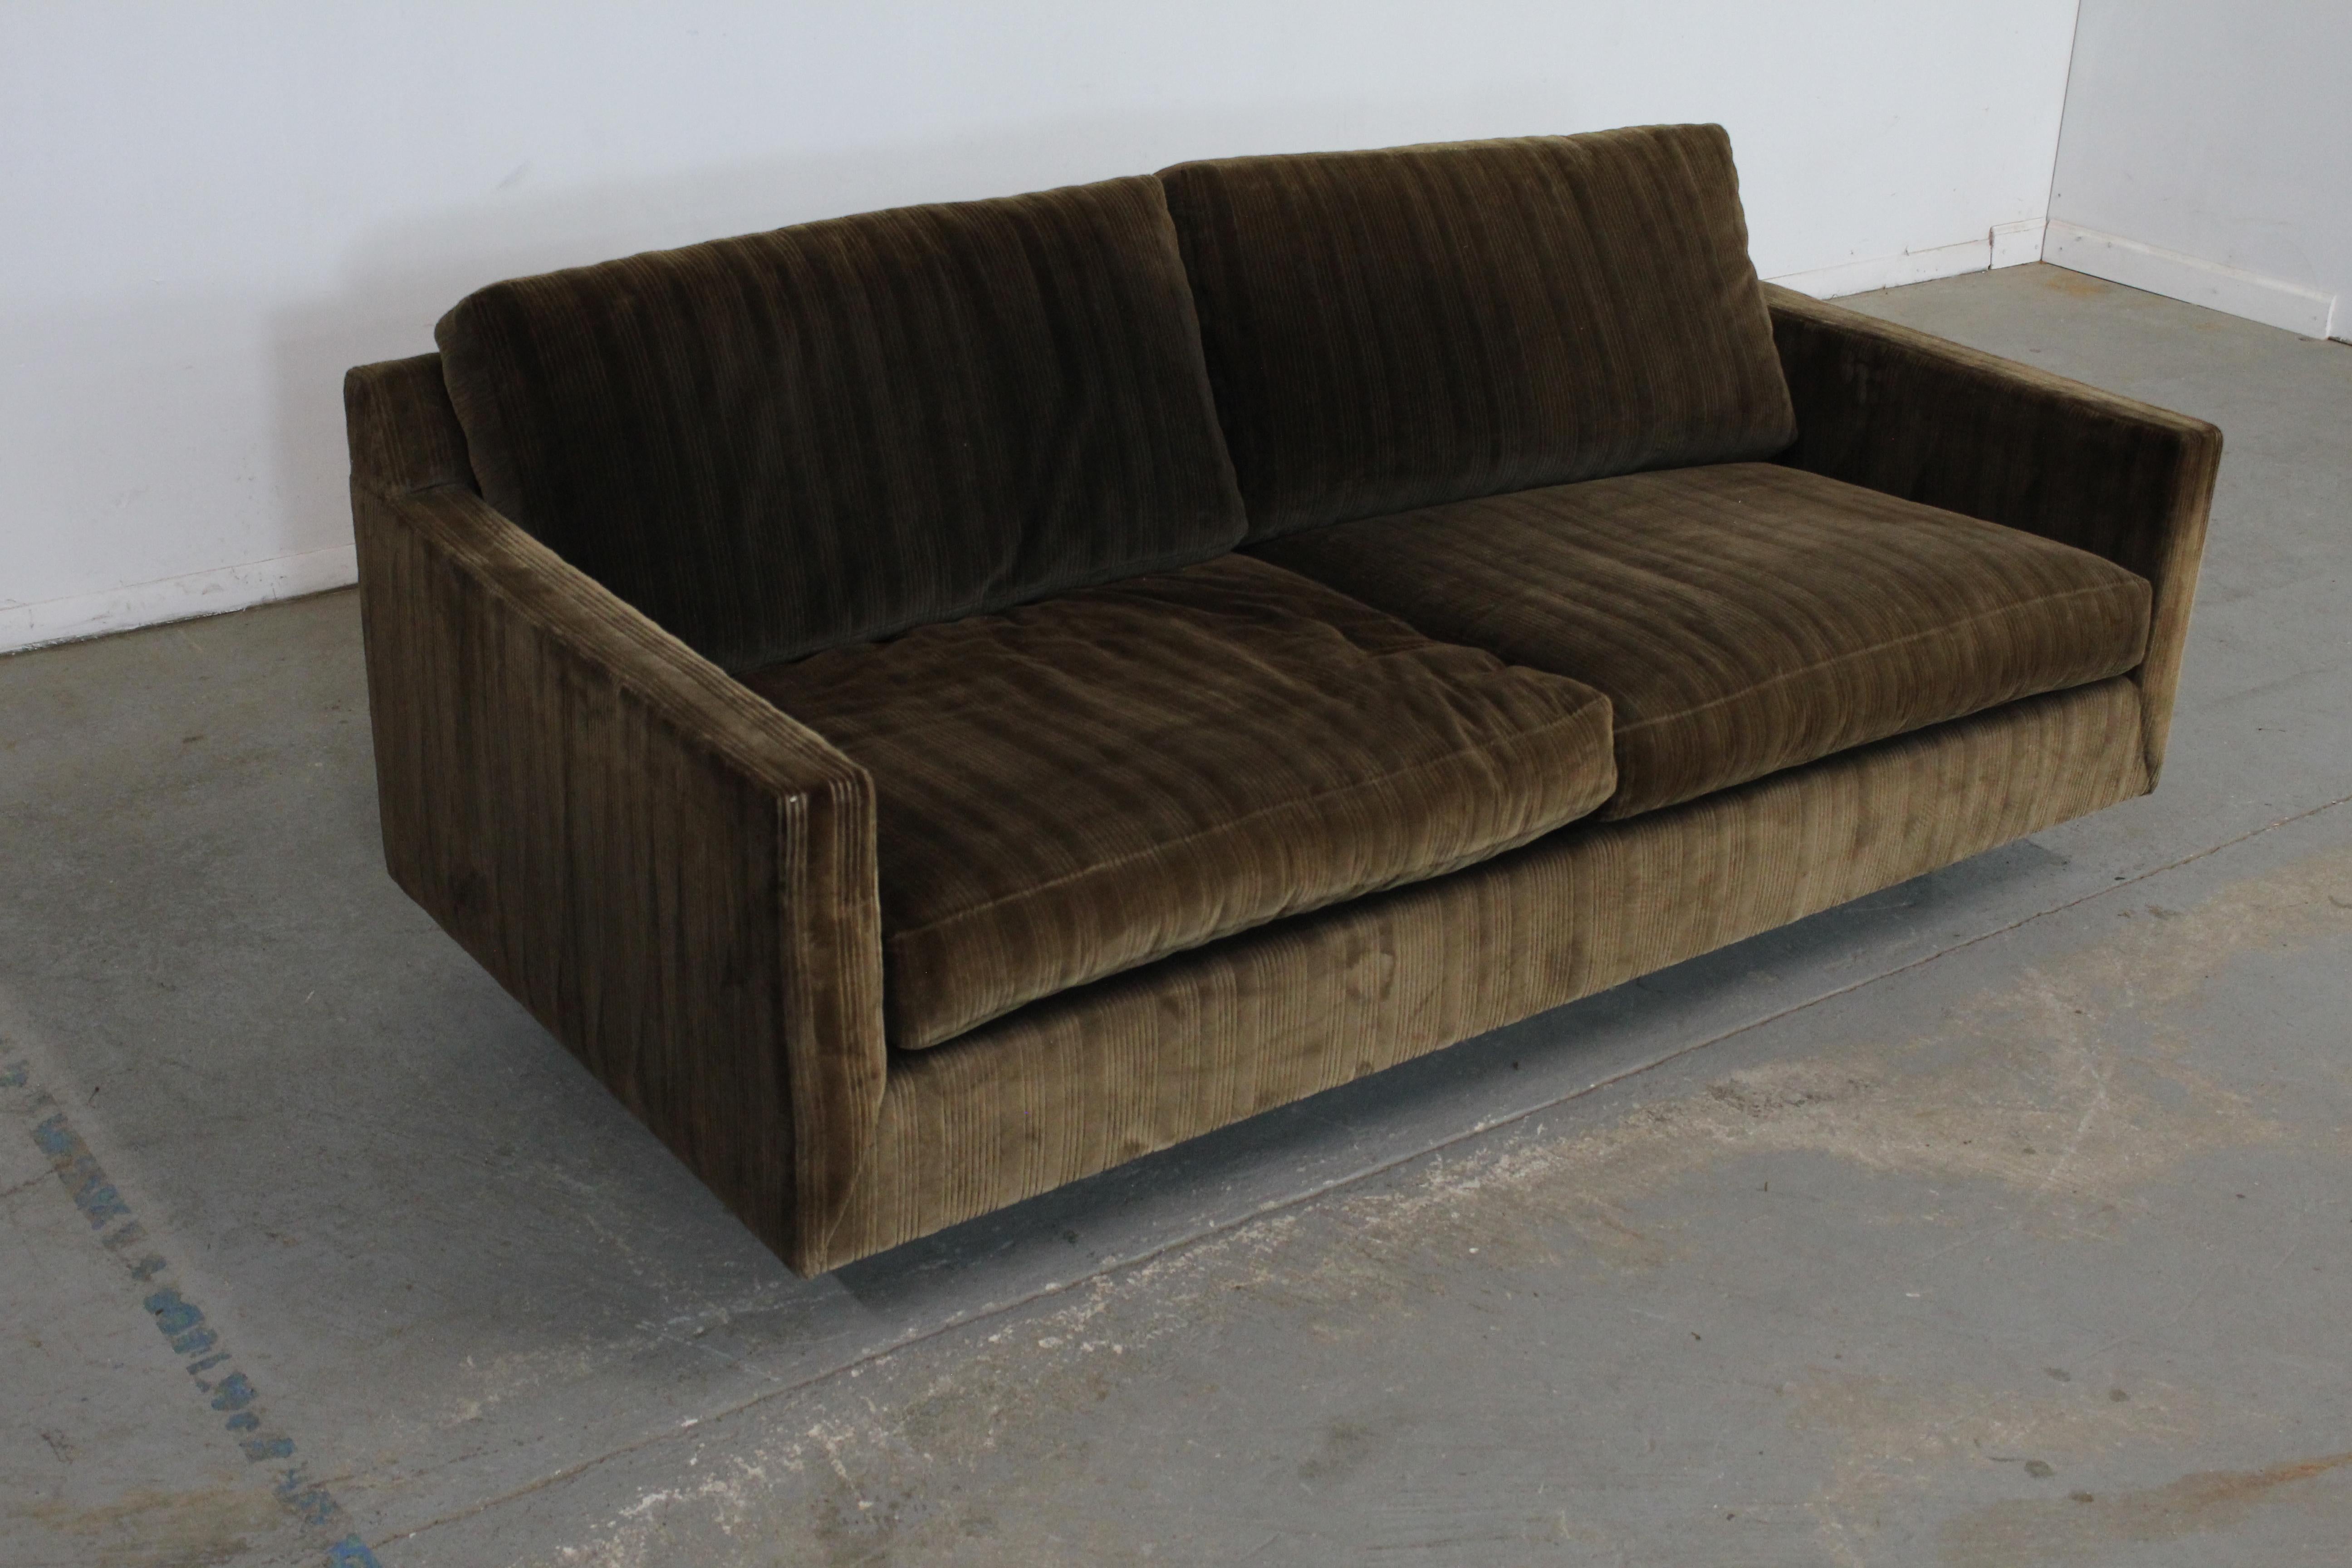 Offered is a vintage Mid-Century Modern sofa similar to the style of Milo Baughman, made by Stratford Designs. This is a three-seat sofa with sleek, modern lines. It is in good vintage condition with some age wear and fading on the upholstery, but